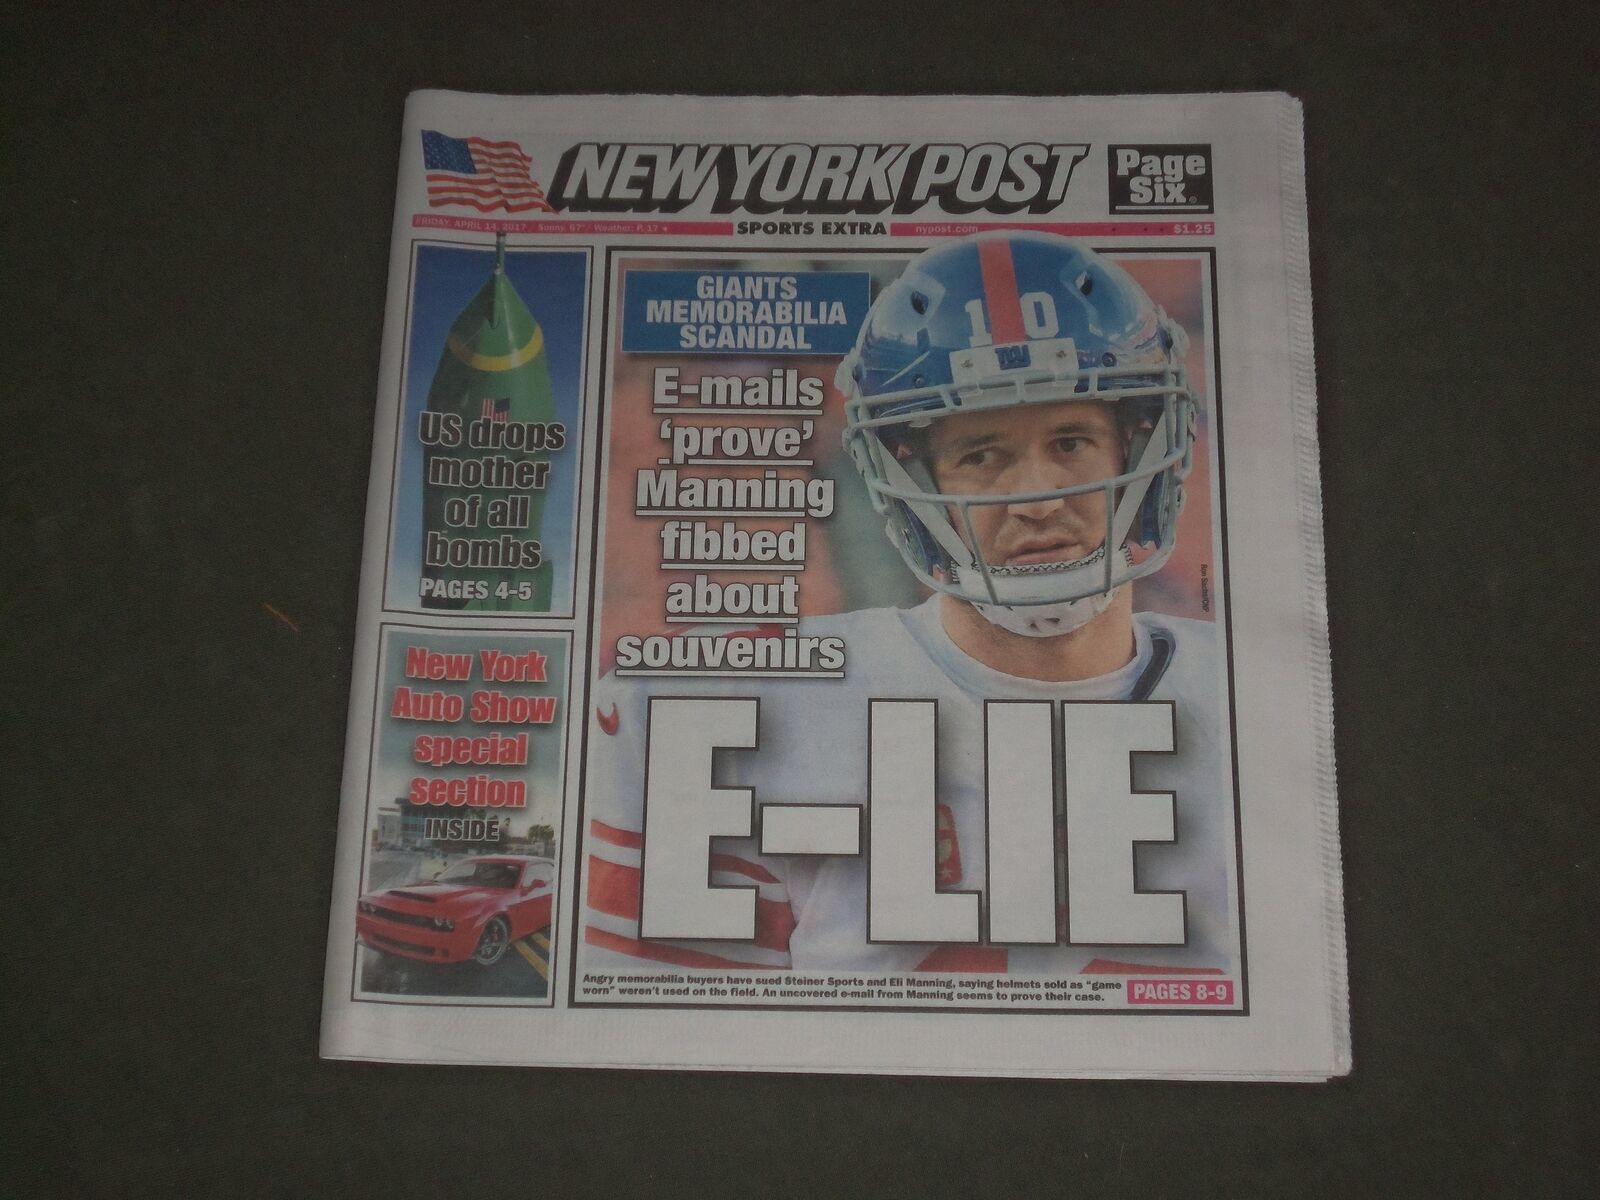 2017 APRIL 14 NEW YORK POST NEWSPAPER - ELI MANNING LIED ABOUT GAME WORN HELMETS